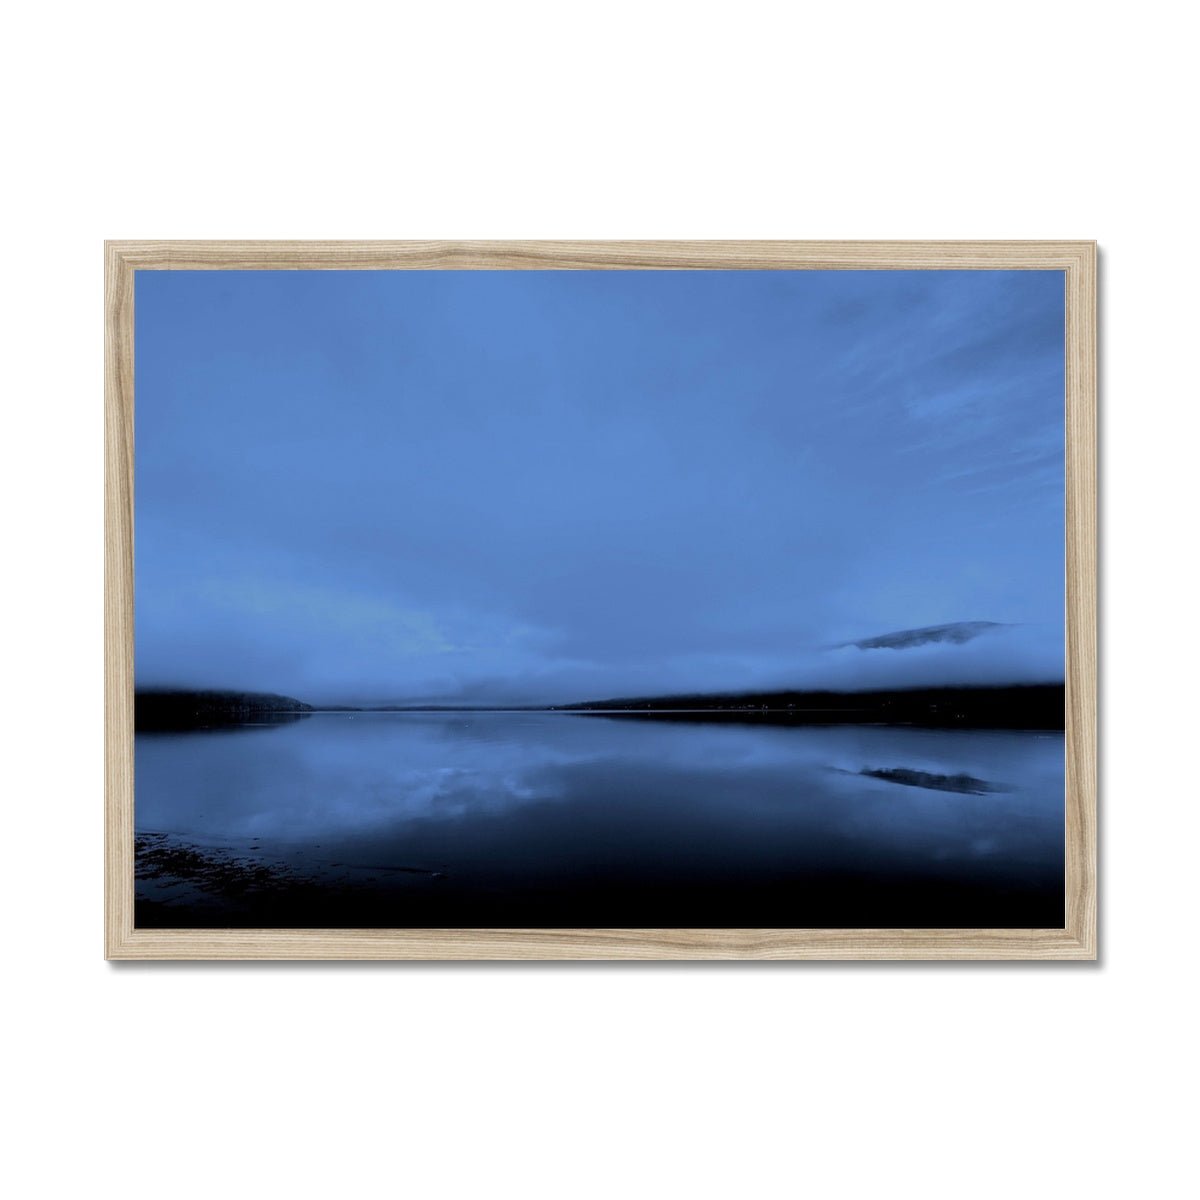 The Blue Hour Loch Fyne Painting | Framed Prints From Scotland-Framed Prints-Scottish Lochs & Mountains Art Gallery-A2 Landscape-Natural Frame-Paintings, Prints, Homeware, Art Gifts From Scotland By Scottish Artist Kevin Hunter